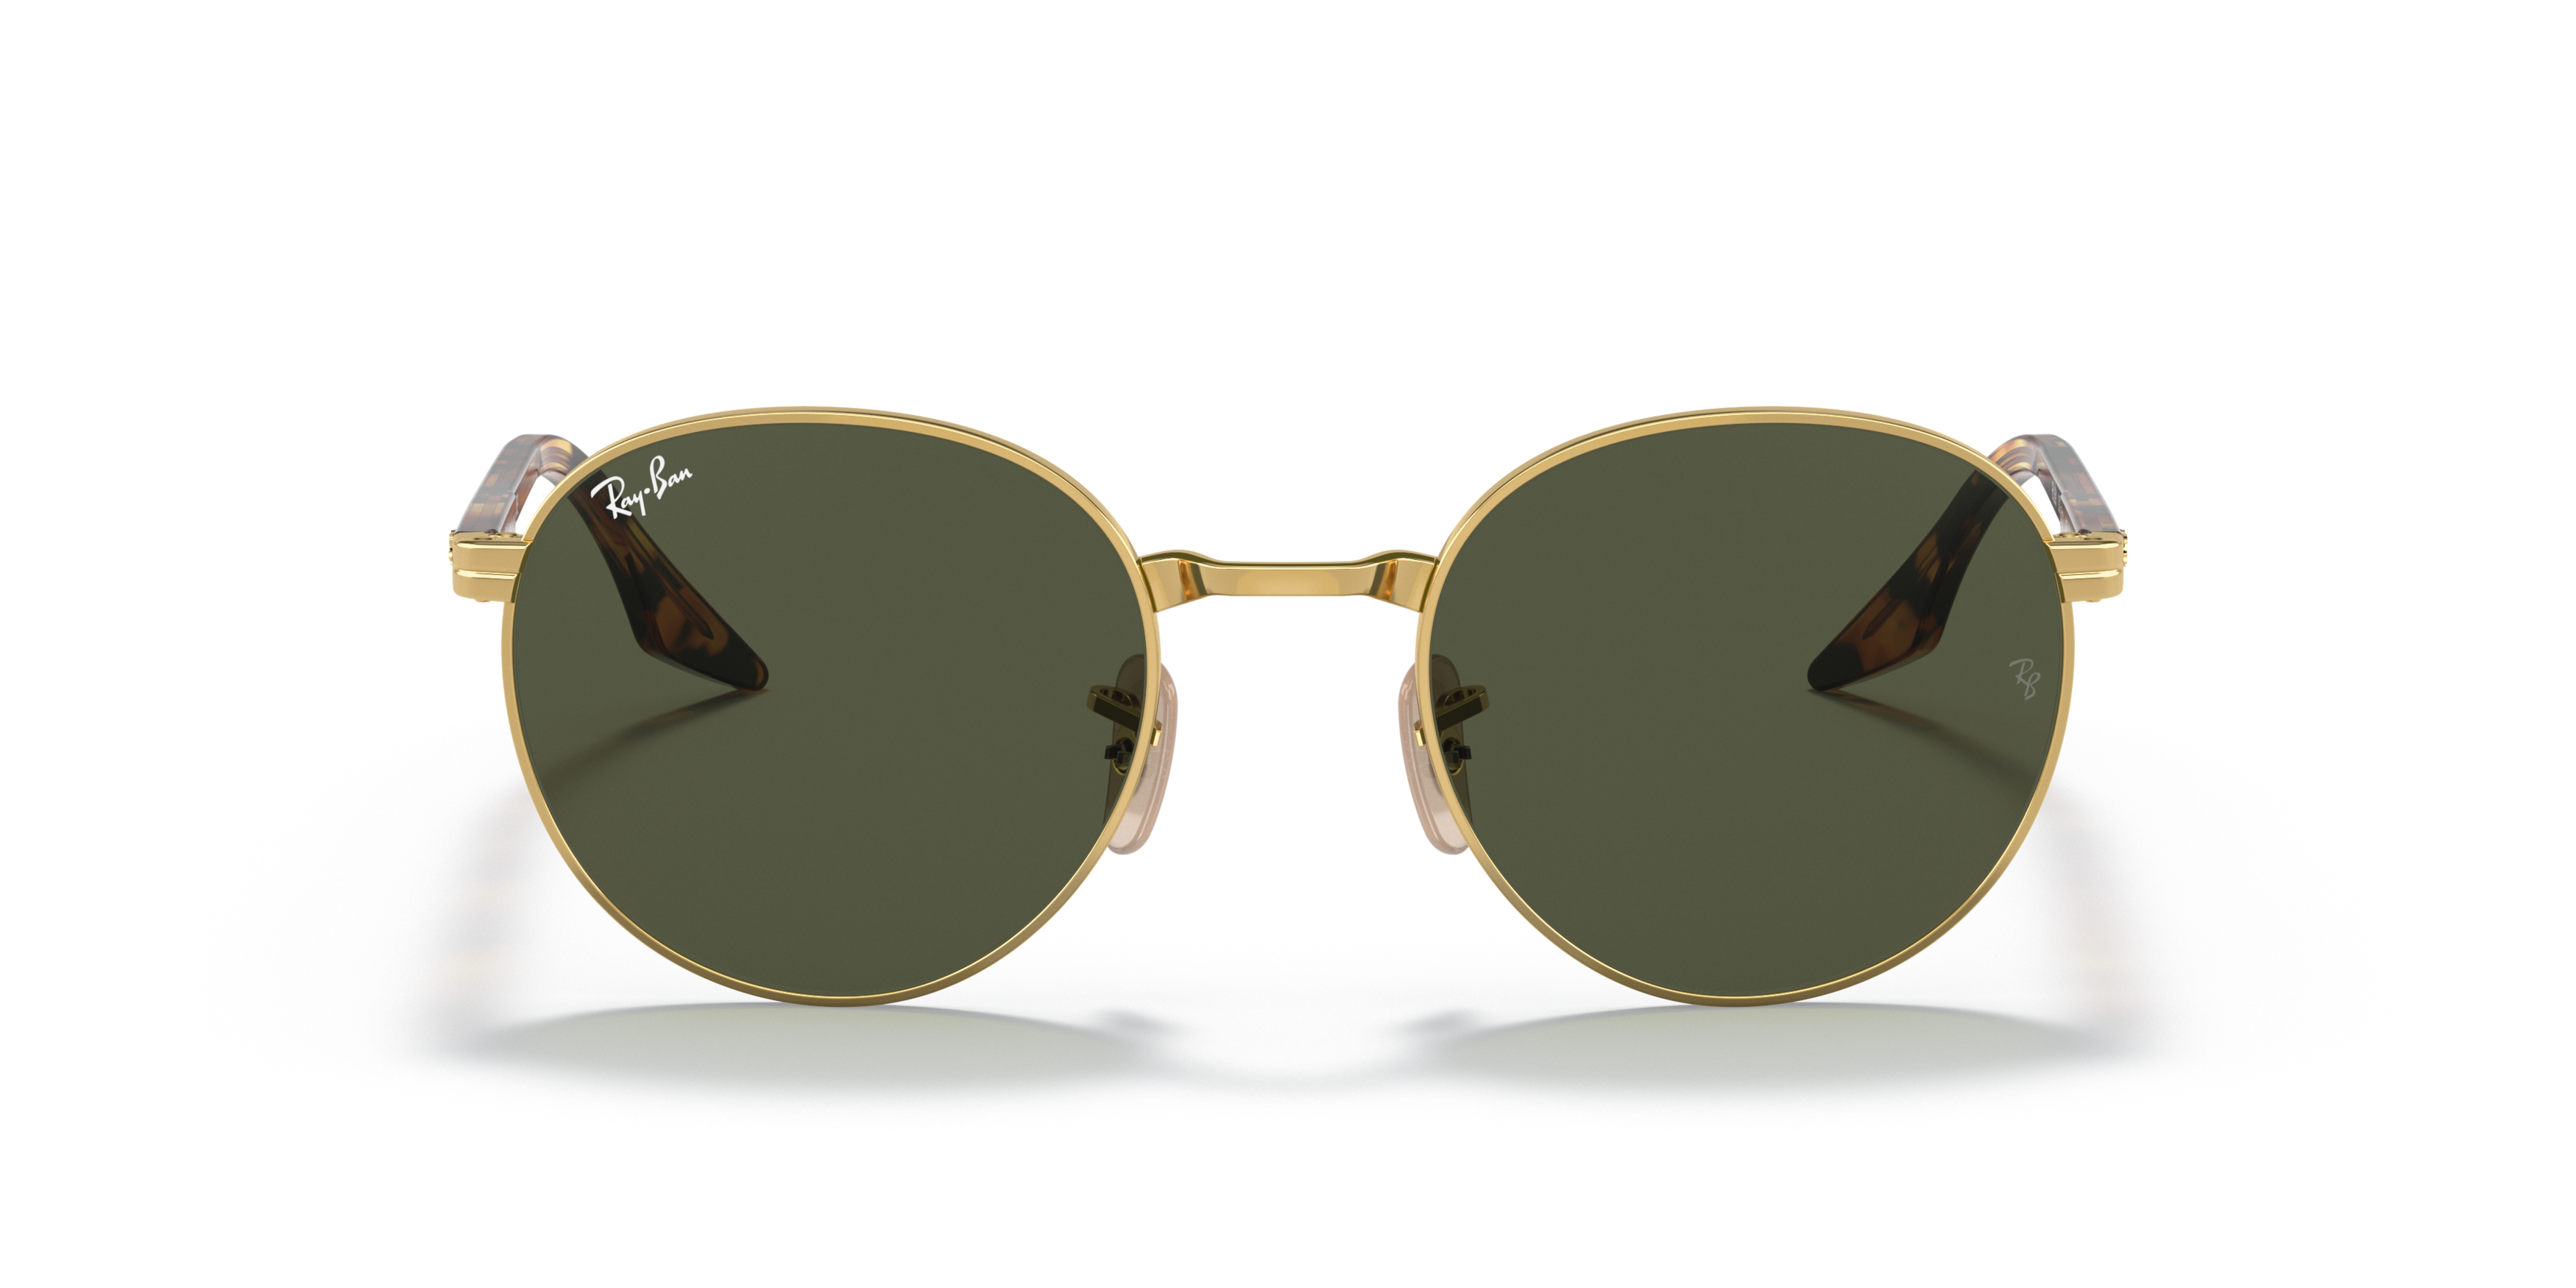 [products.image.front] RAY-BAN RB3691 001/31